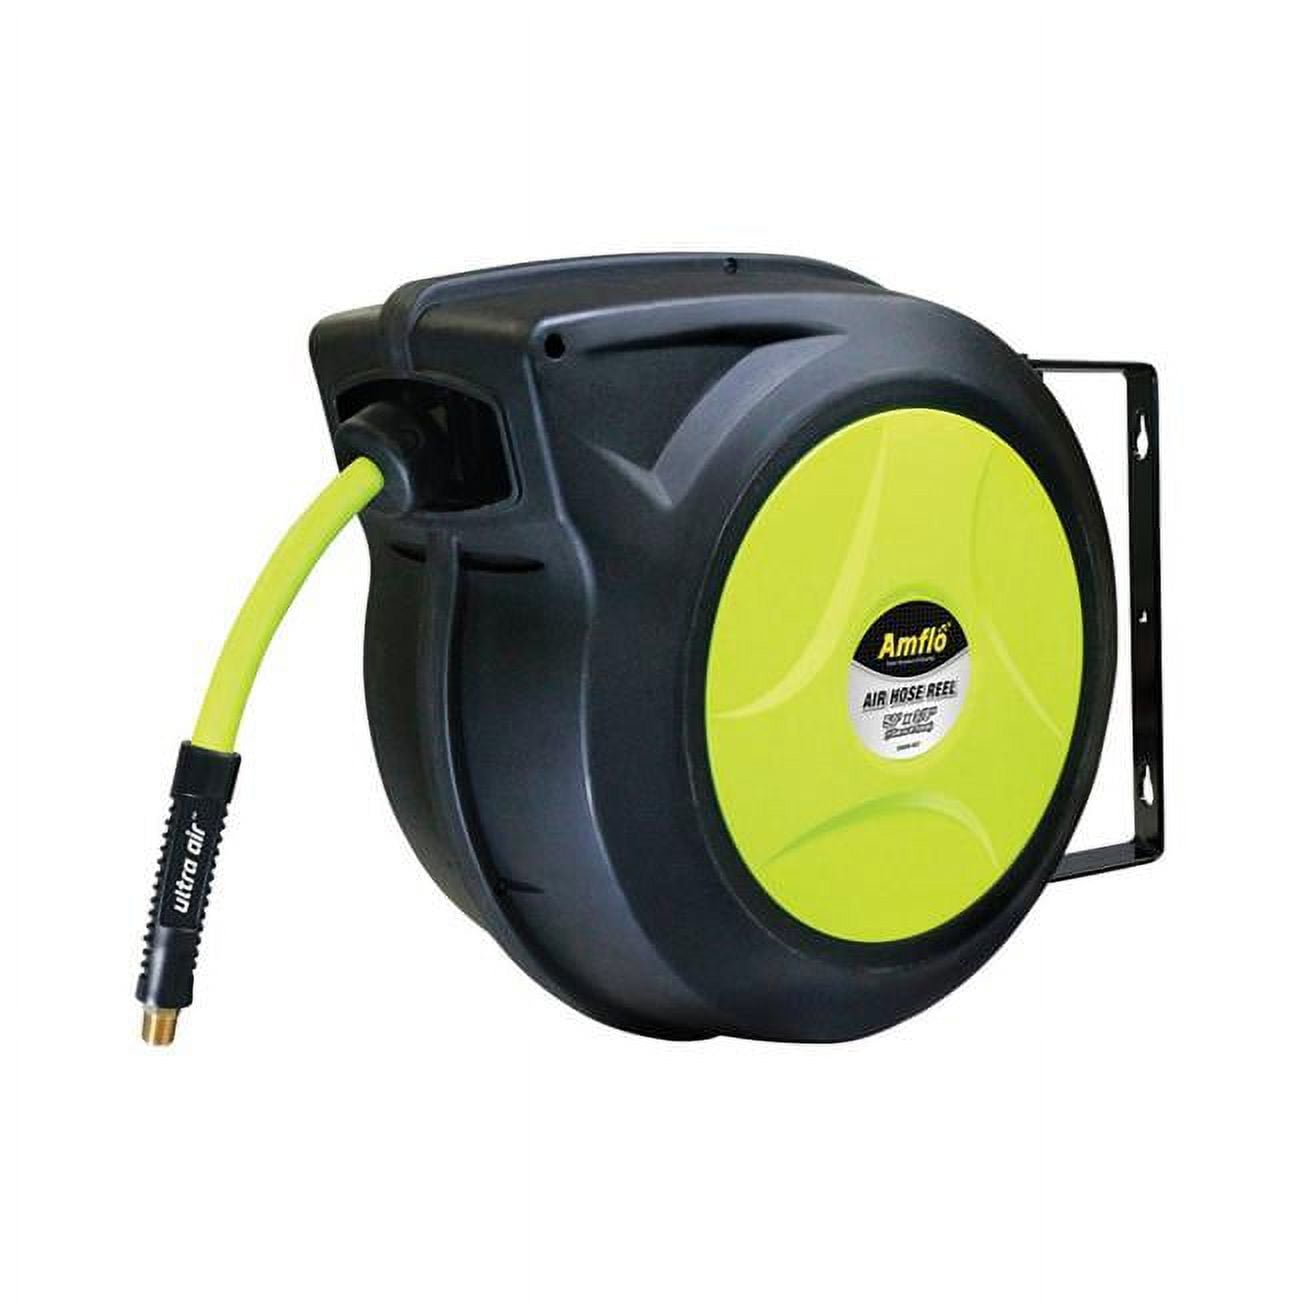 Picture of Plews 1794957 0.37 x 50 ft. 300 PSI Amflo Ultra Air Hybrid Air Hose Reel, Assorted